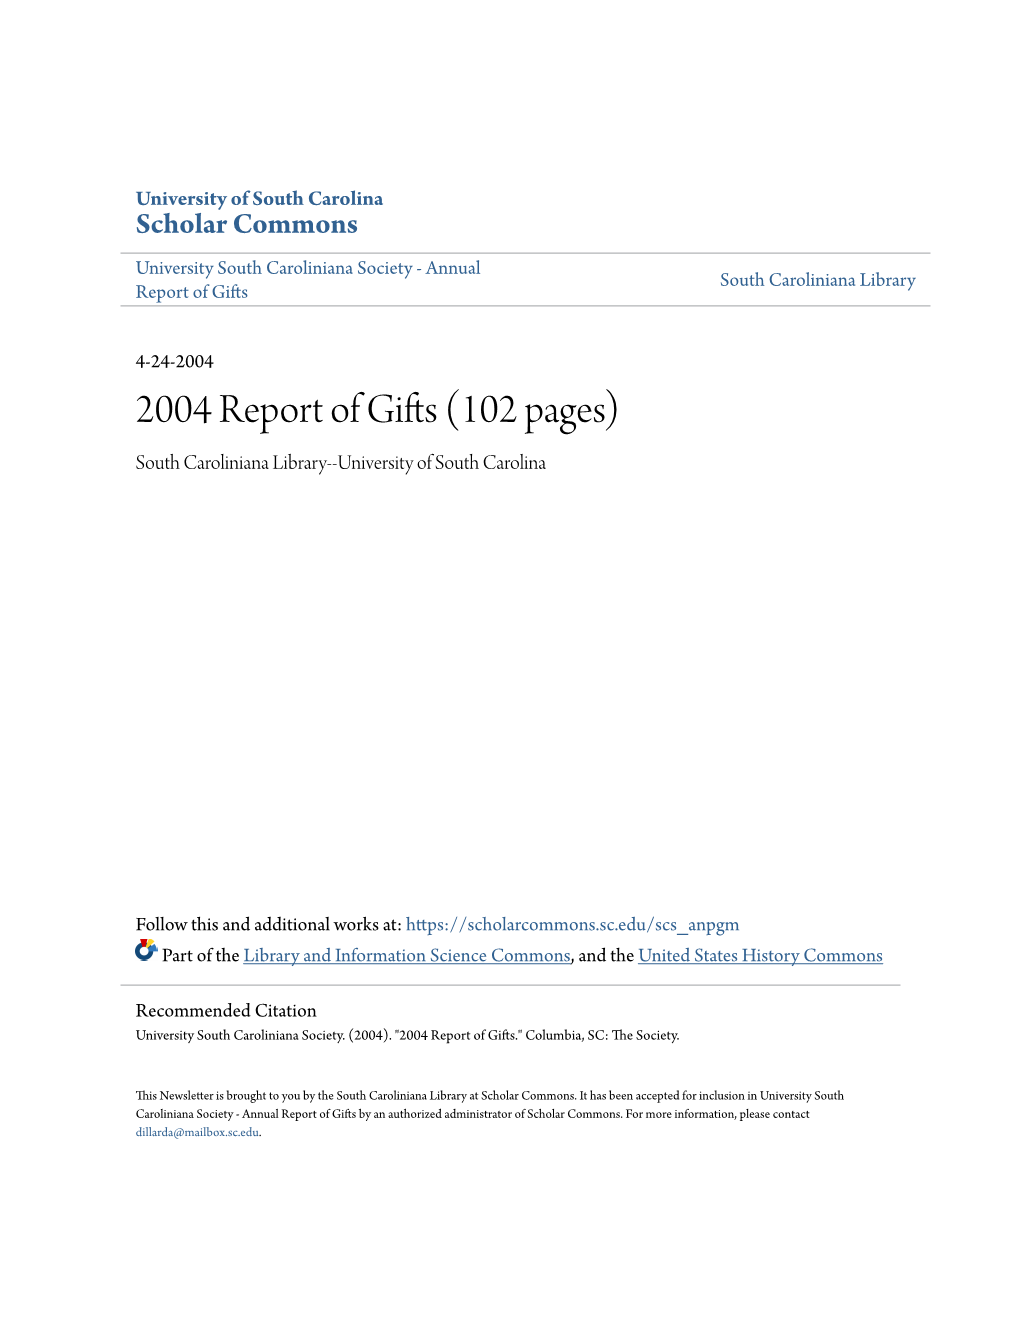 2004 Report of Gifts (102 Pages) South Caroliniana Library--University of South Carolina